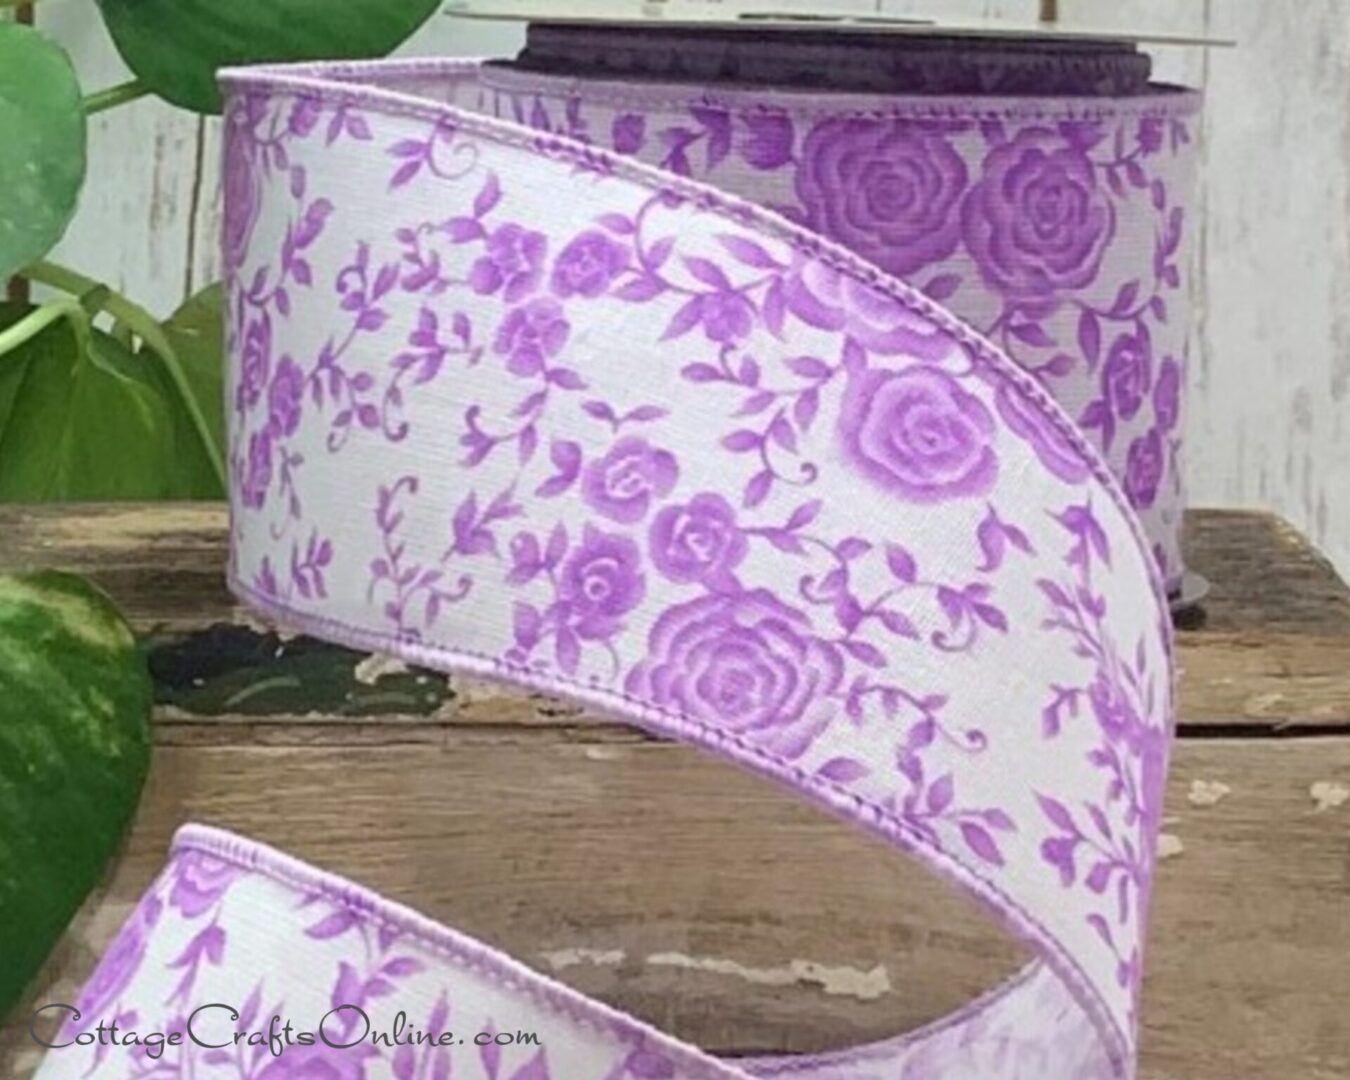 A purple ribbon with flowers on it